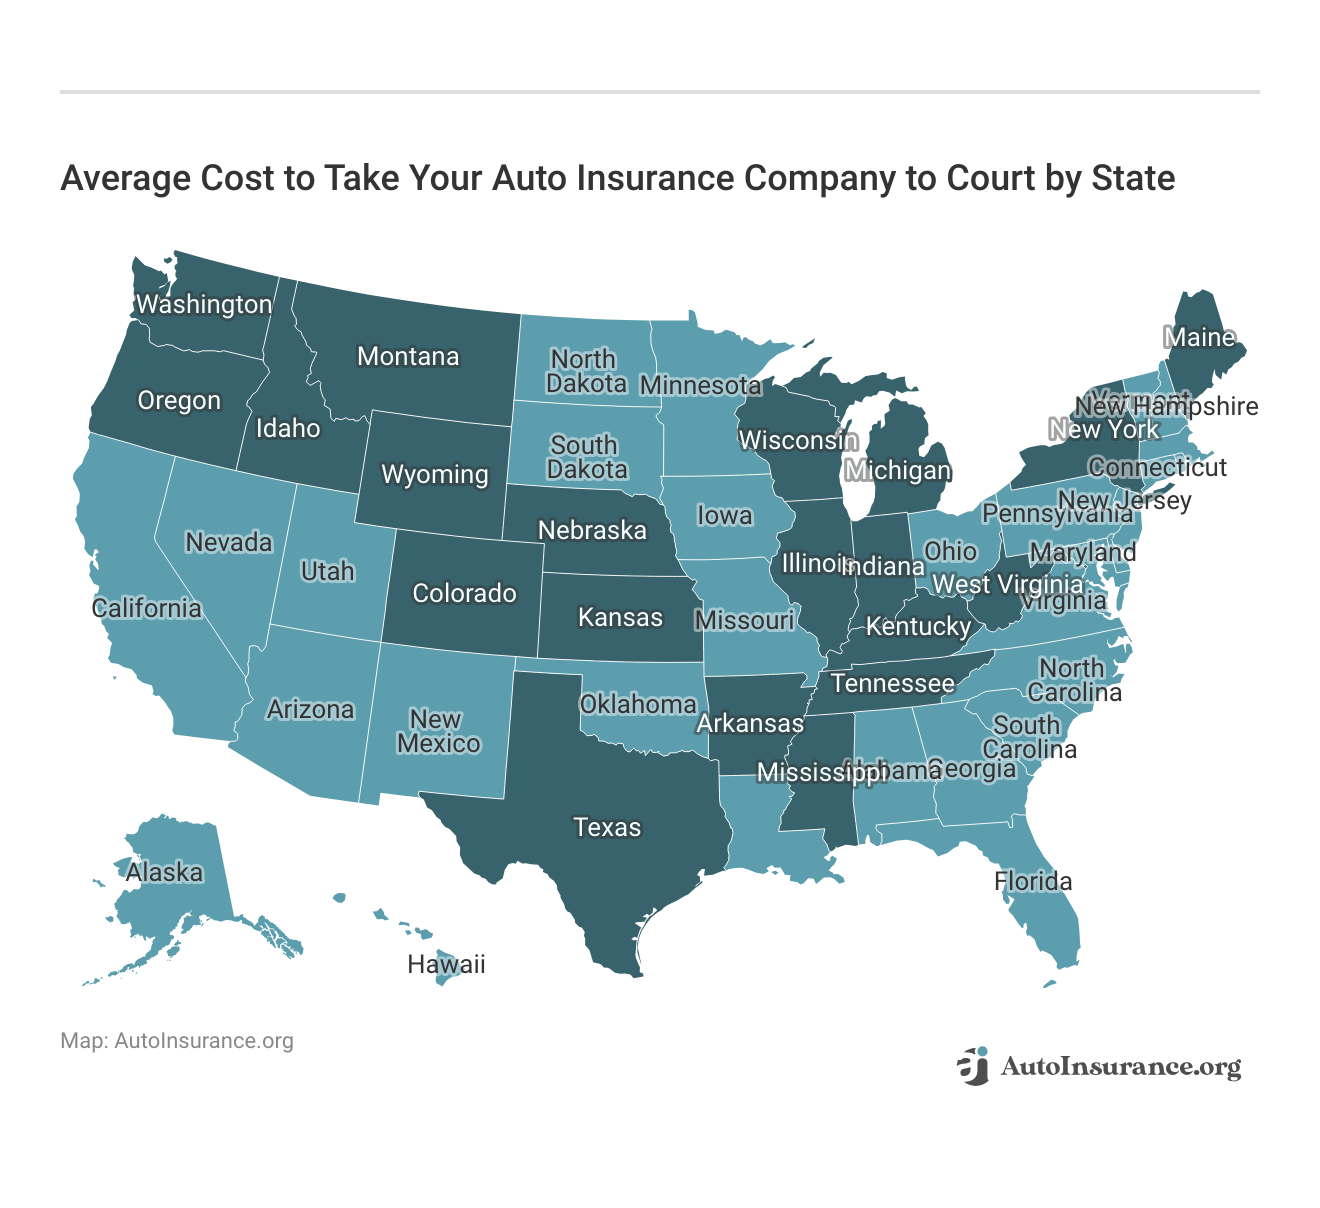 <h3>Average Cost to Take Your Auto Insurance Company to Court by State</h3>